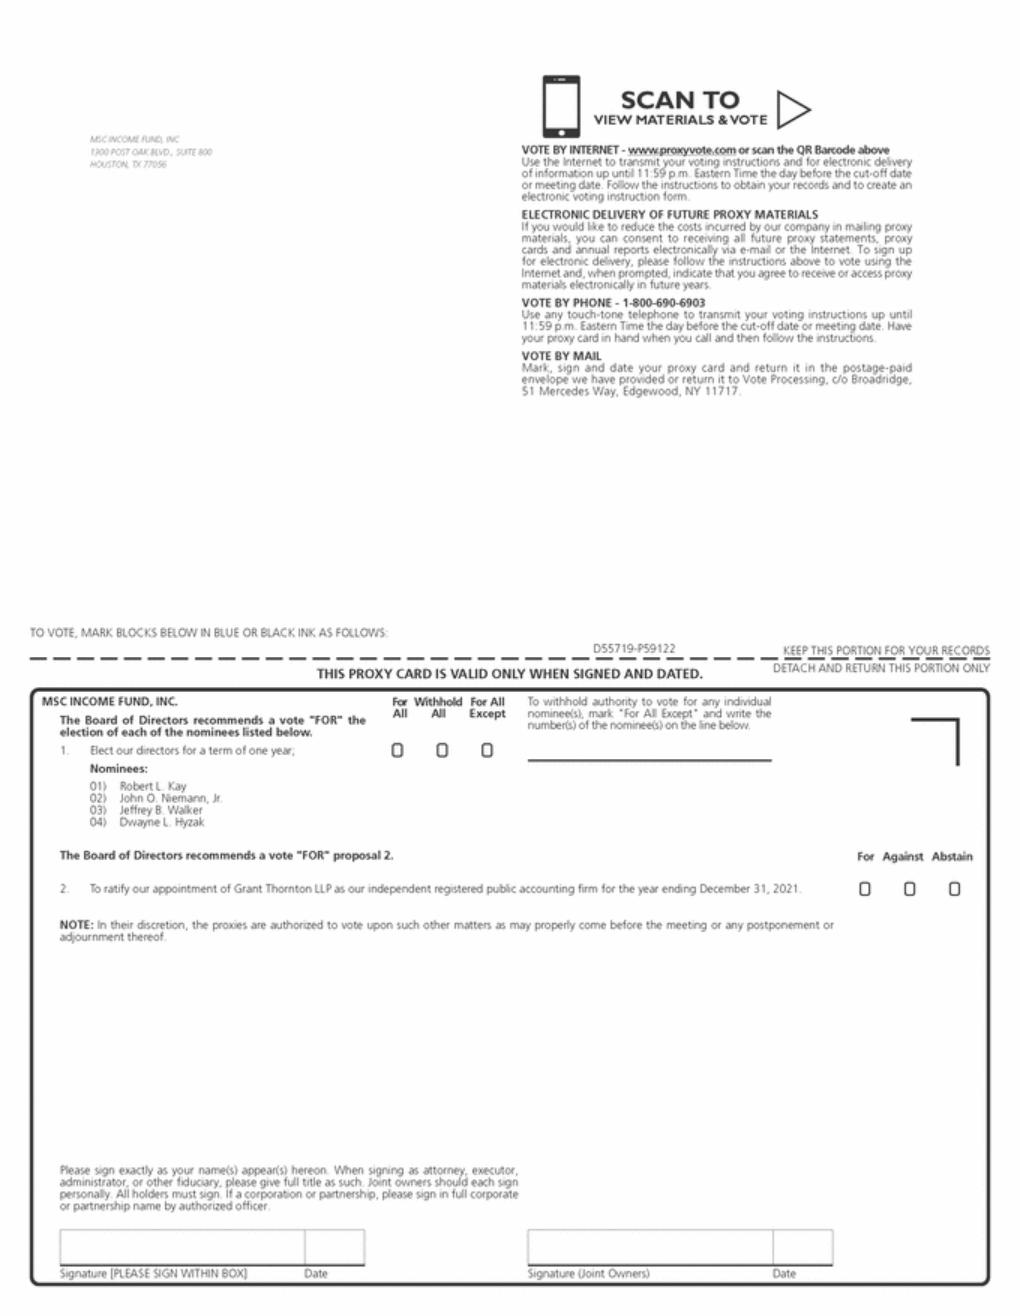 New Microsoft Word Document_m_page_1.gif